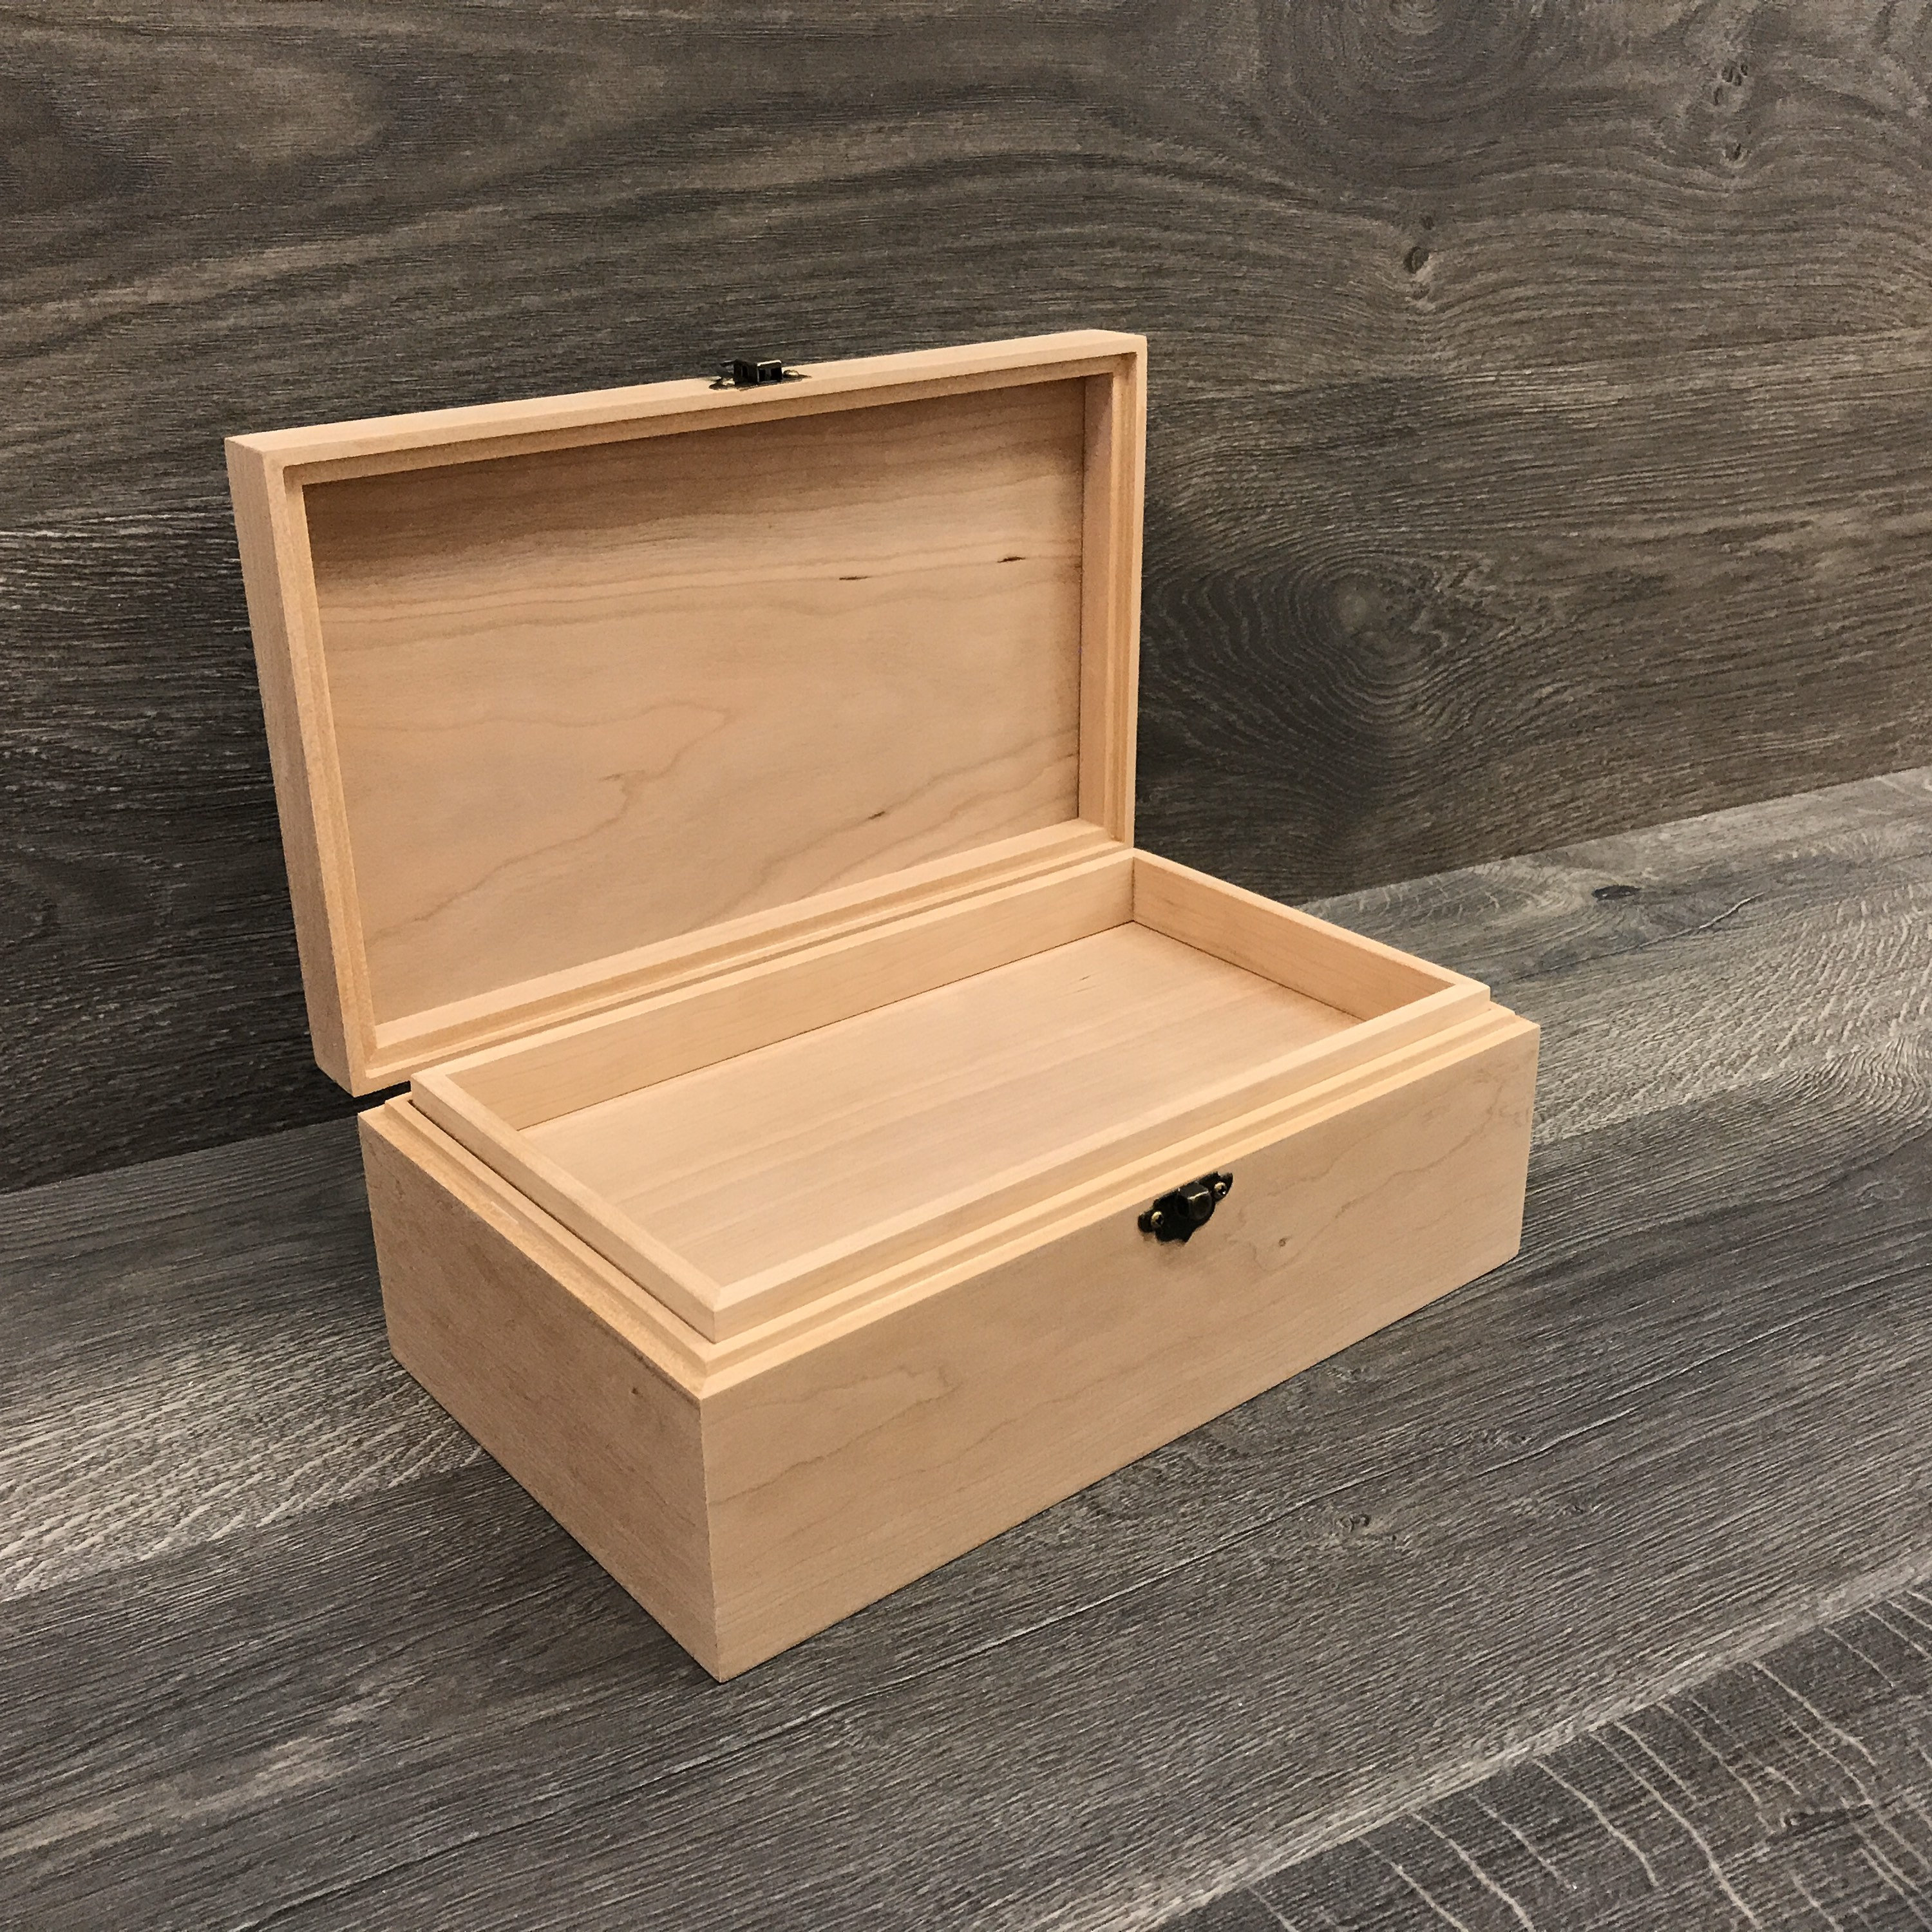 Unfinished Wooden Hinged Box, 7 x 7